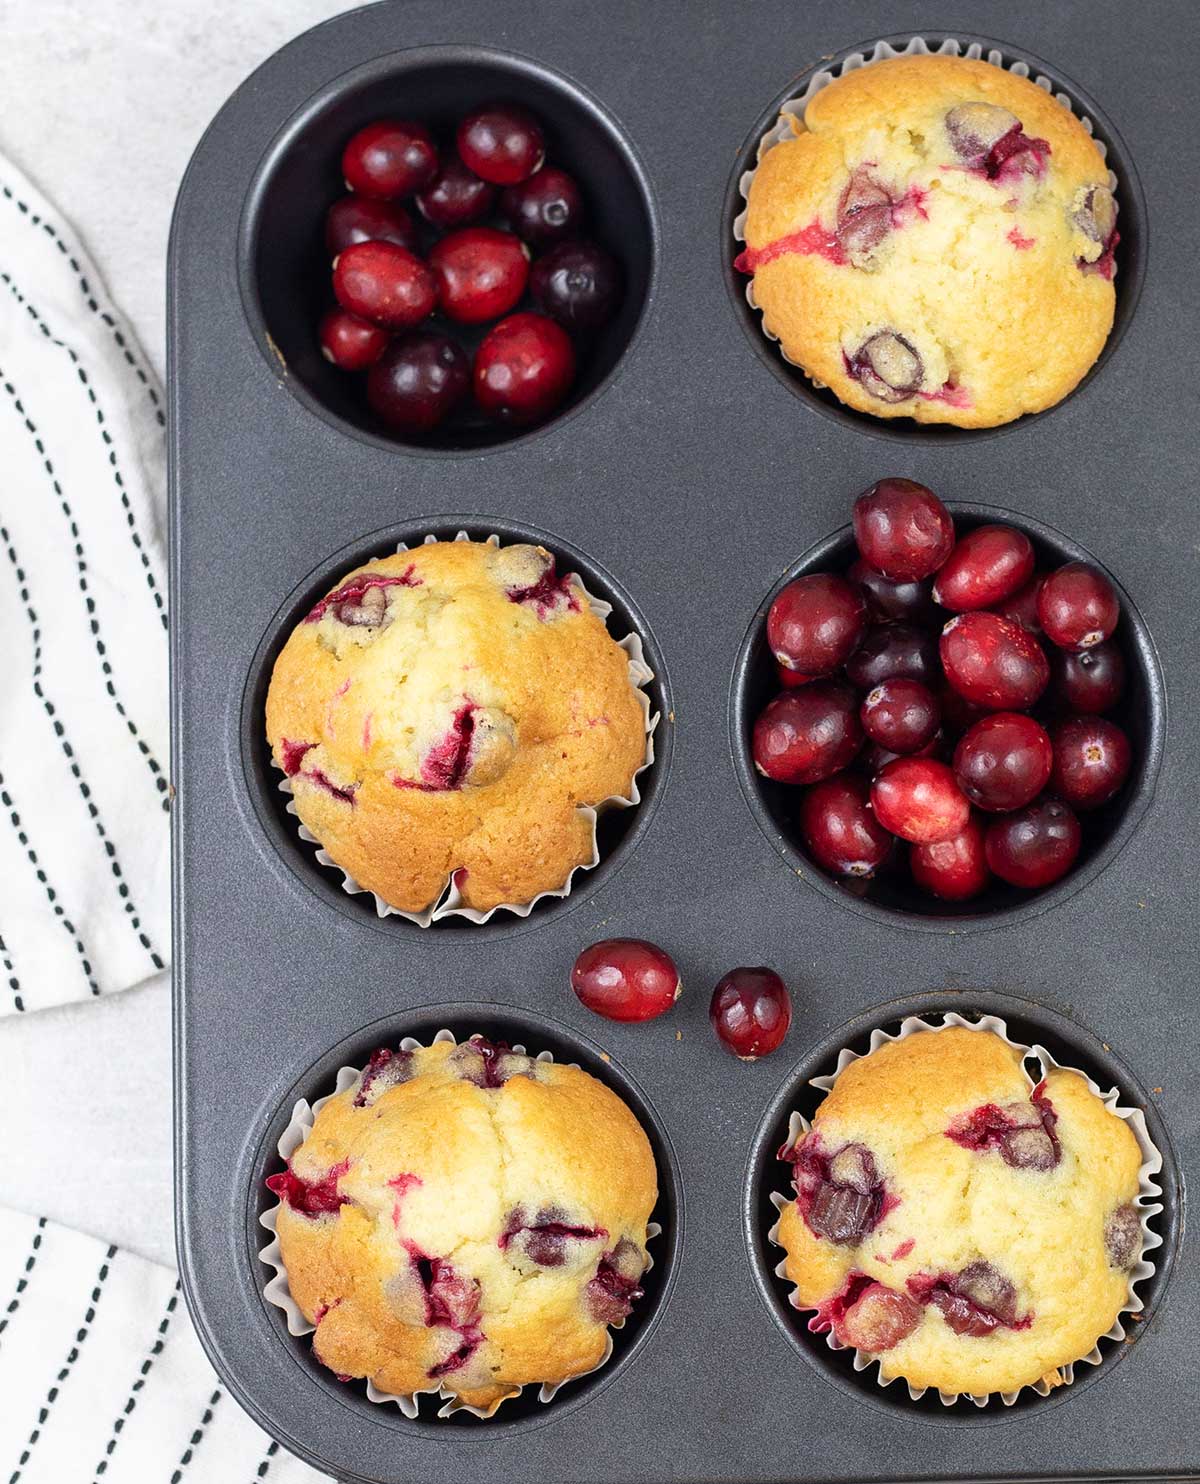 Cranberry Muffins in a muffin tin along with fresh Cranberries